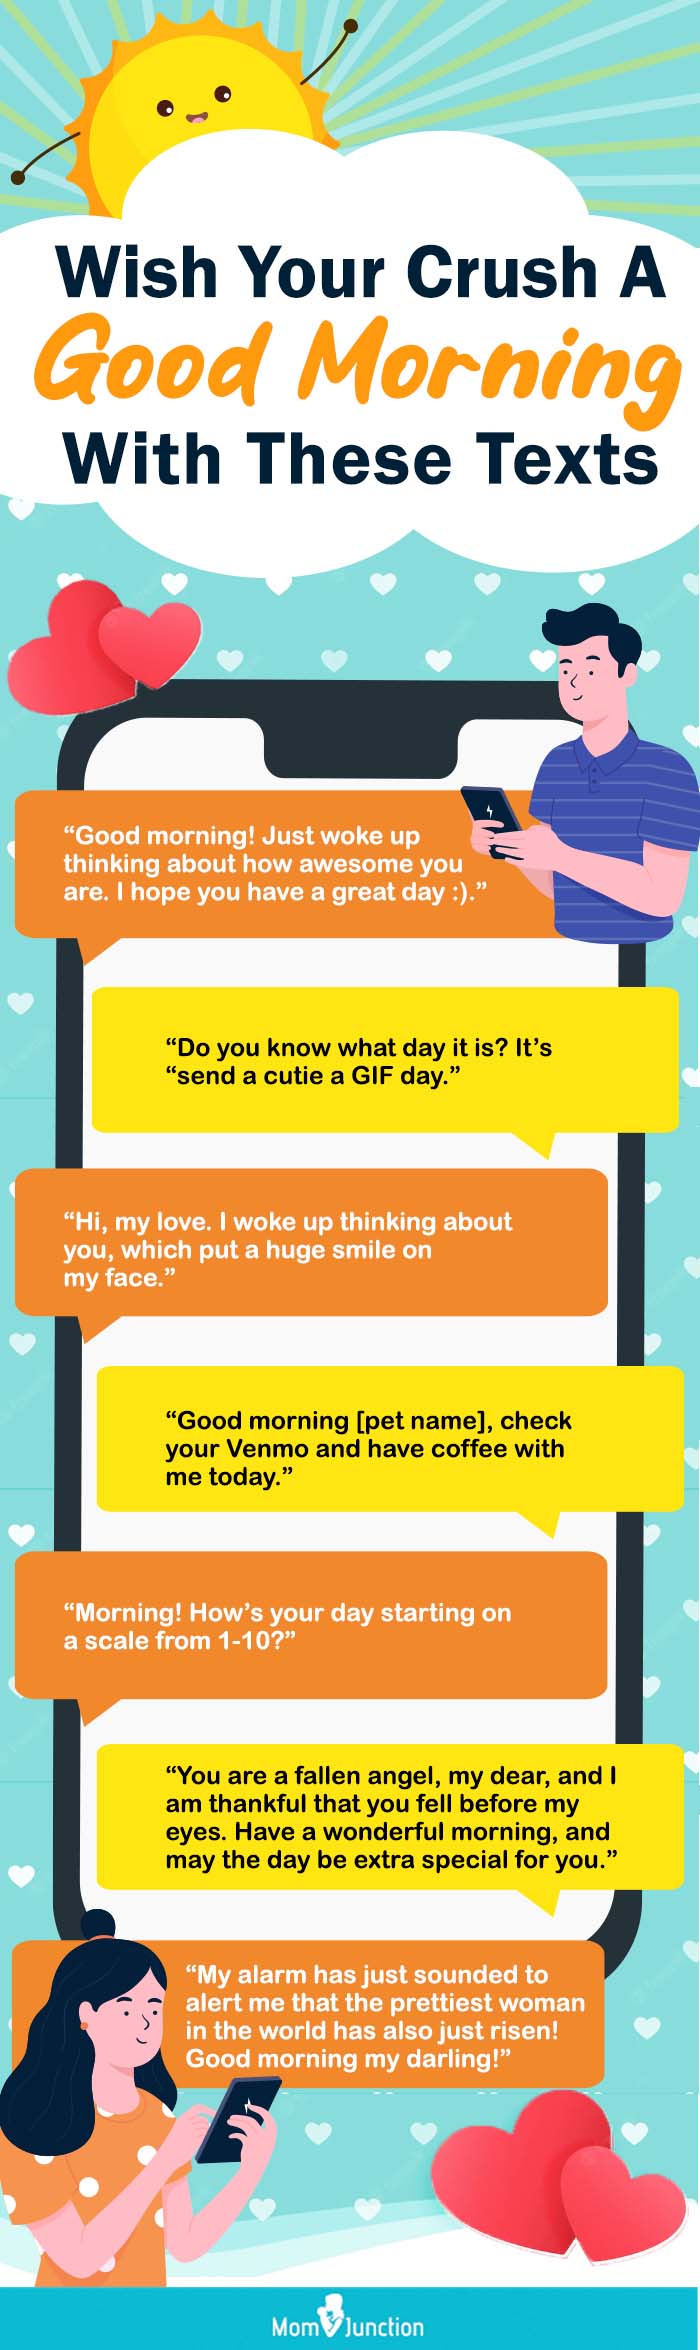 good morning texts for crush (infographic)